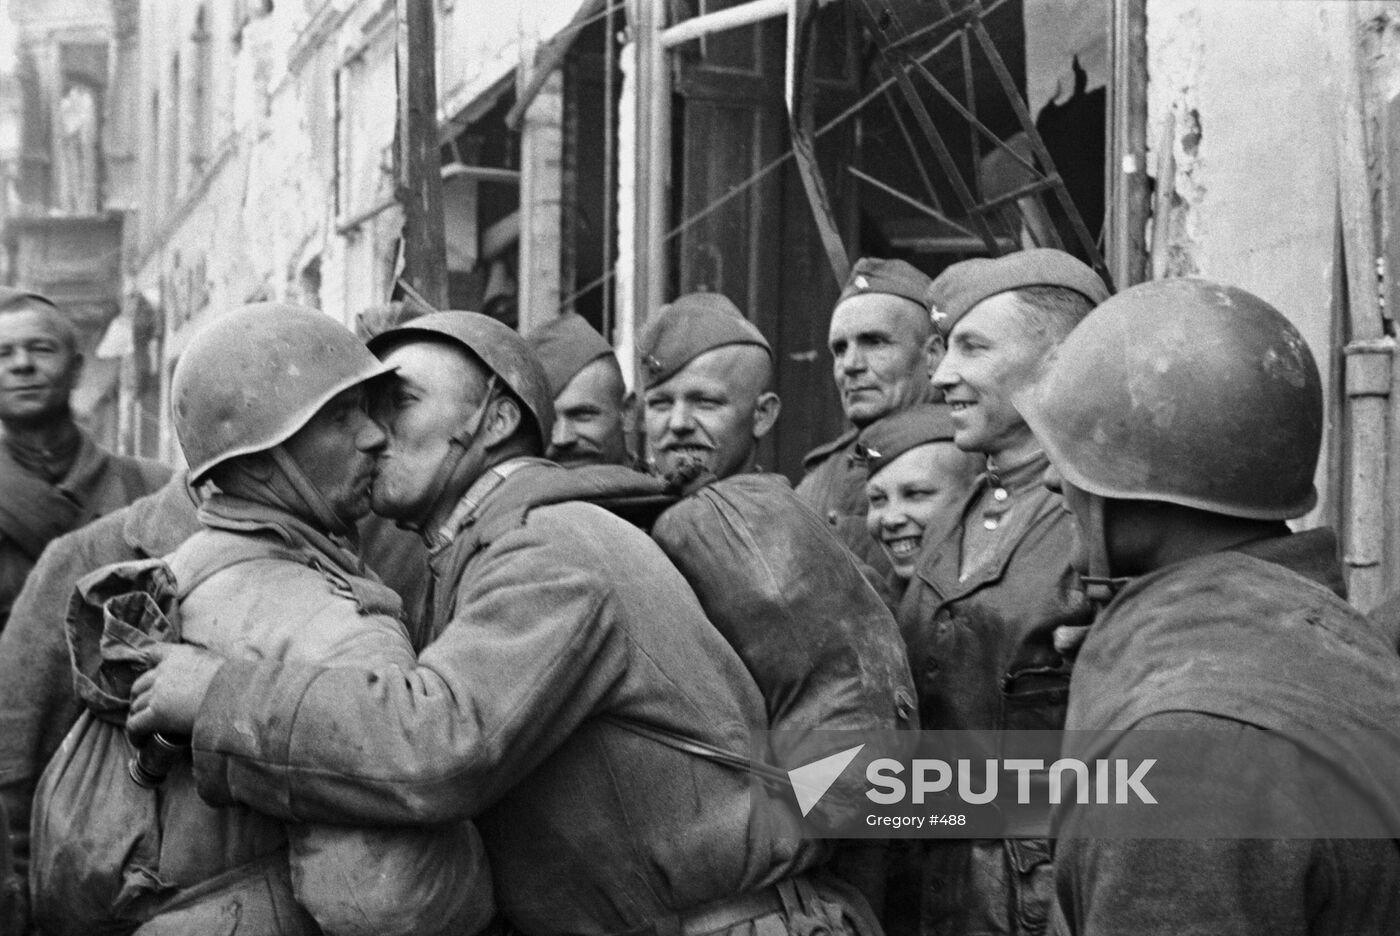 SOLDIERS COUNTRYMEN MEETING